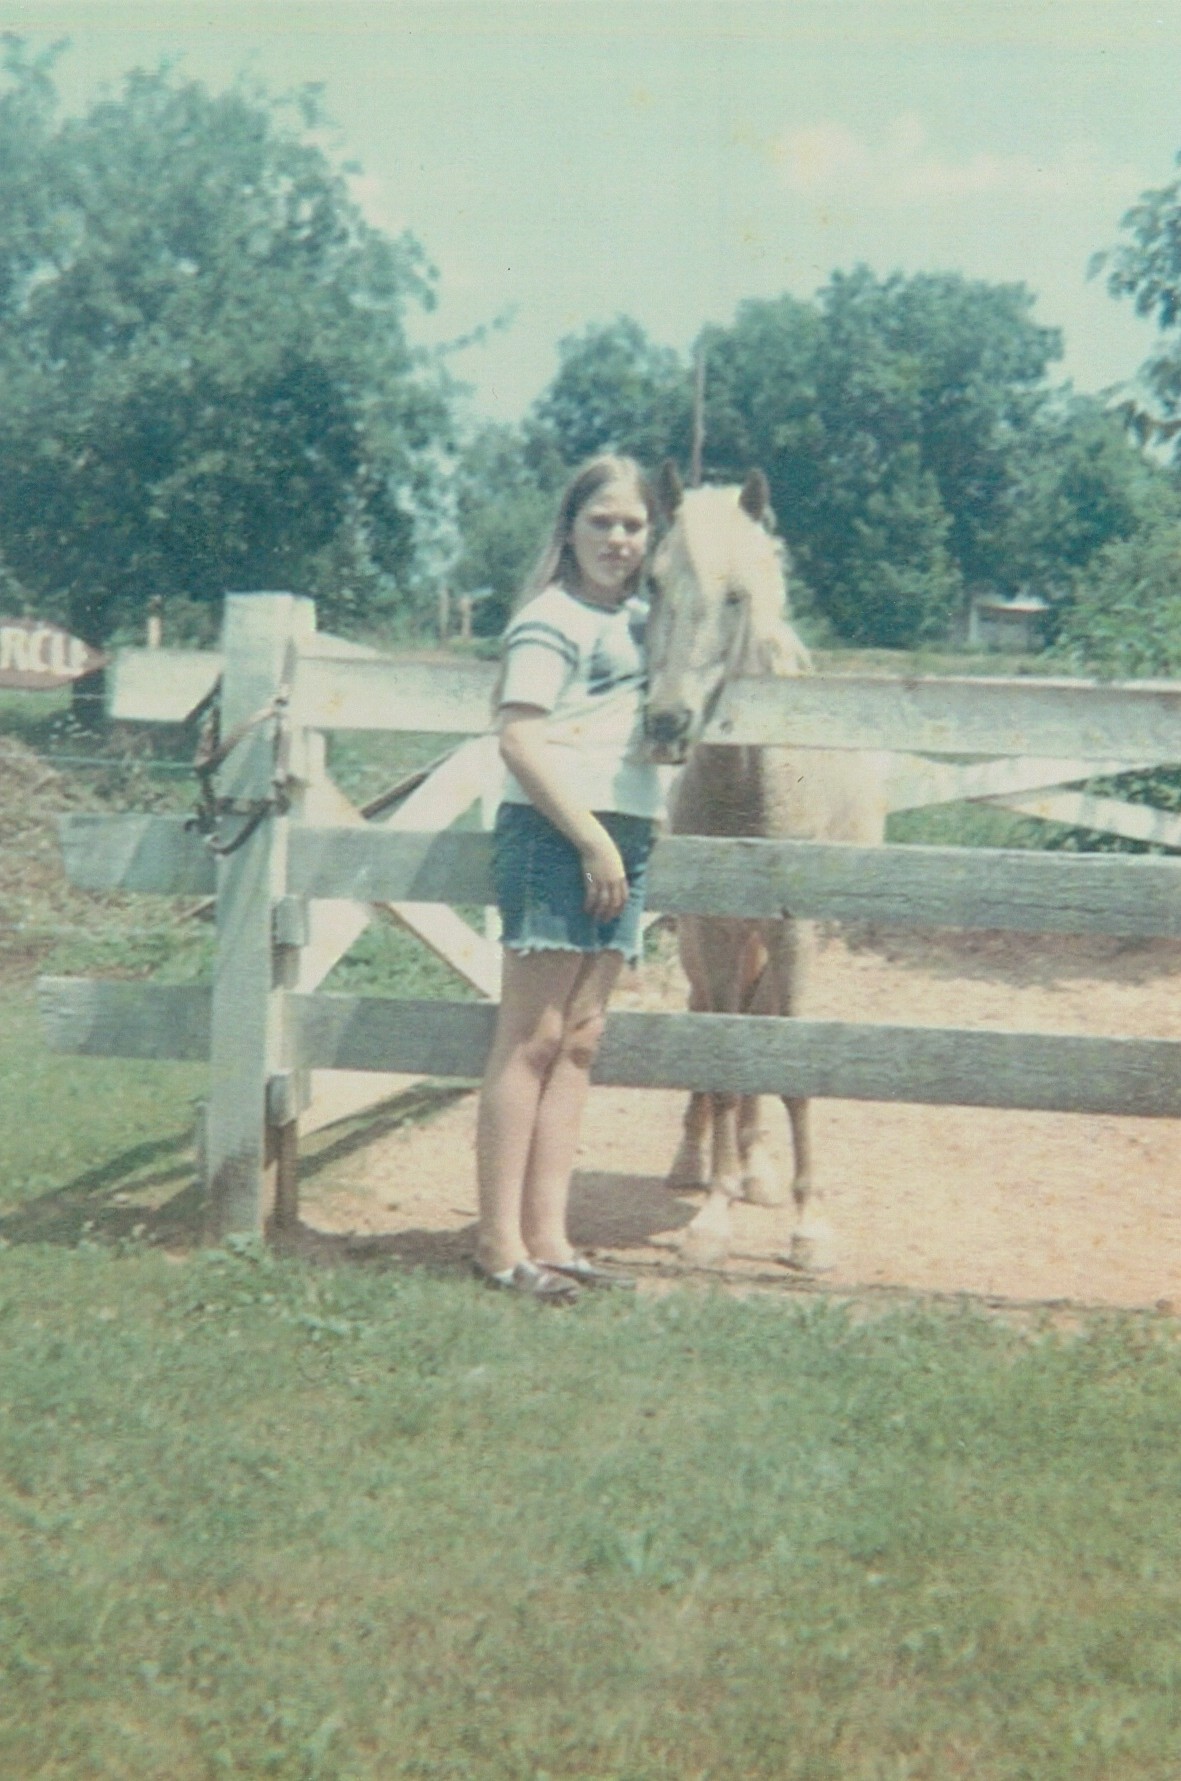 Julia and Thunder, her horse